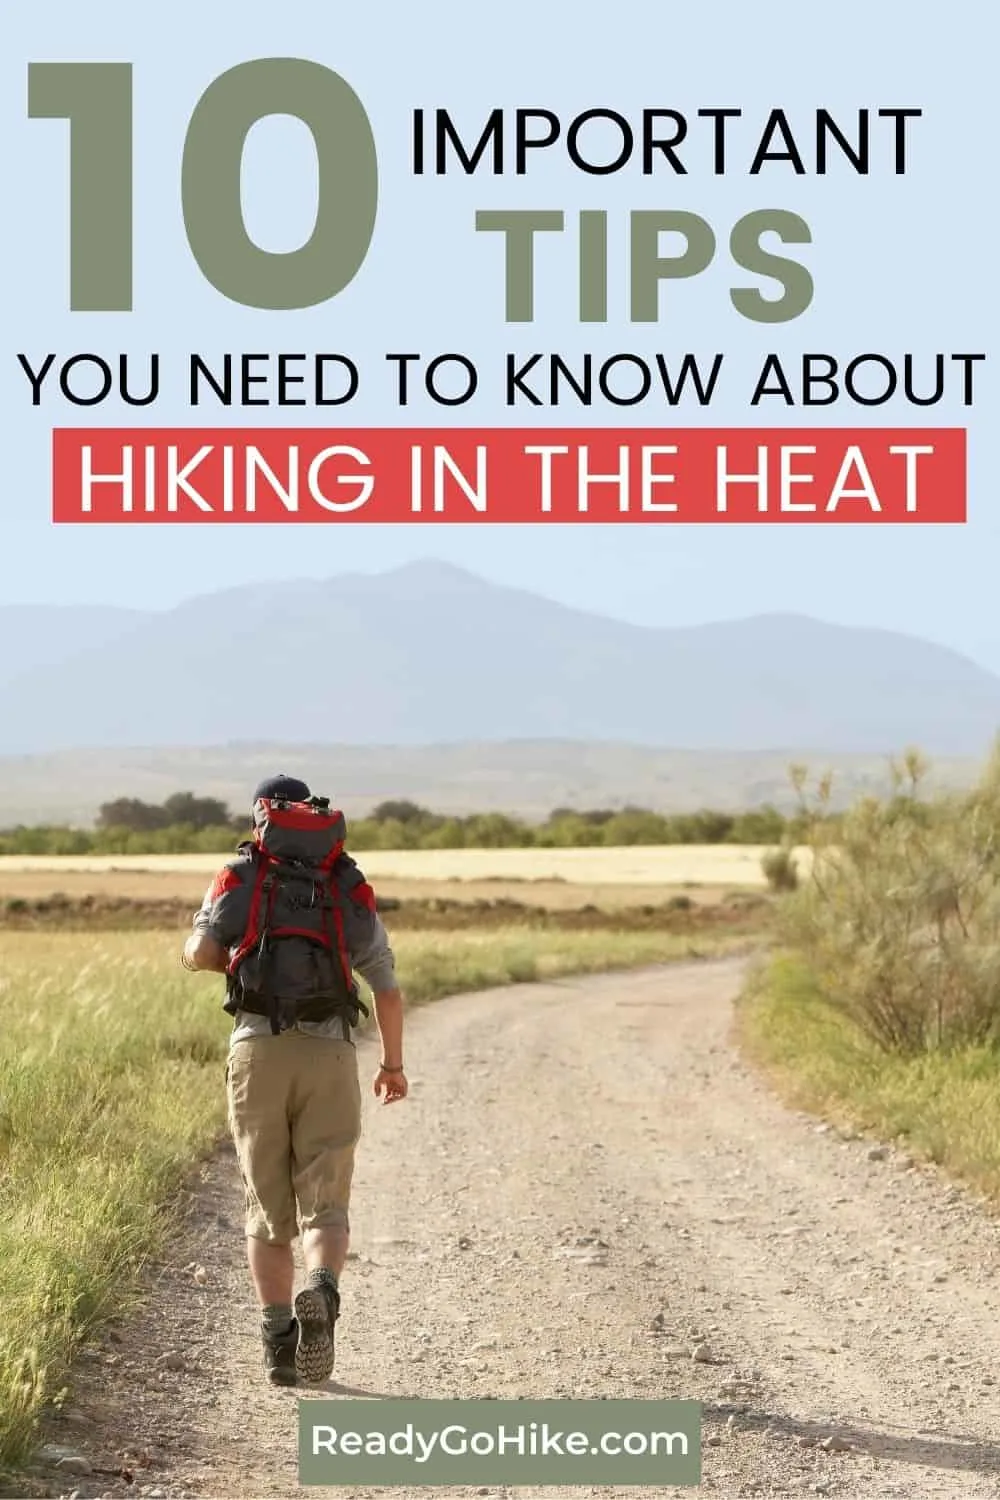 Hiker walking down dirt road text overlay 10 Important Tips You Need to Know About Hiking in the Heat